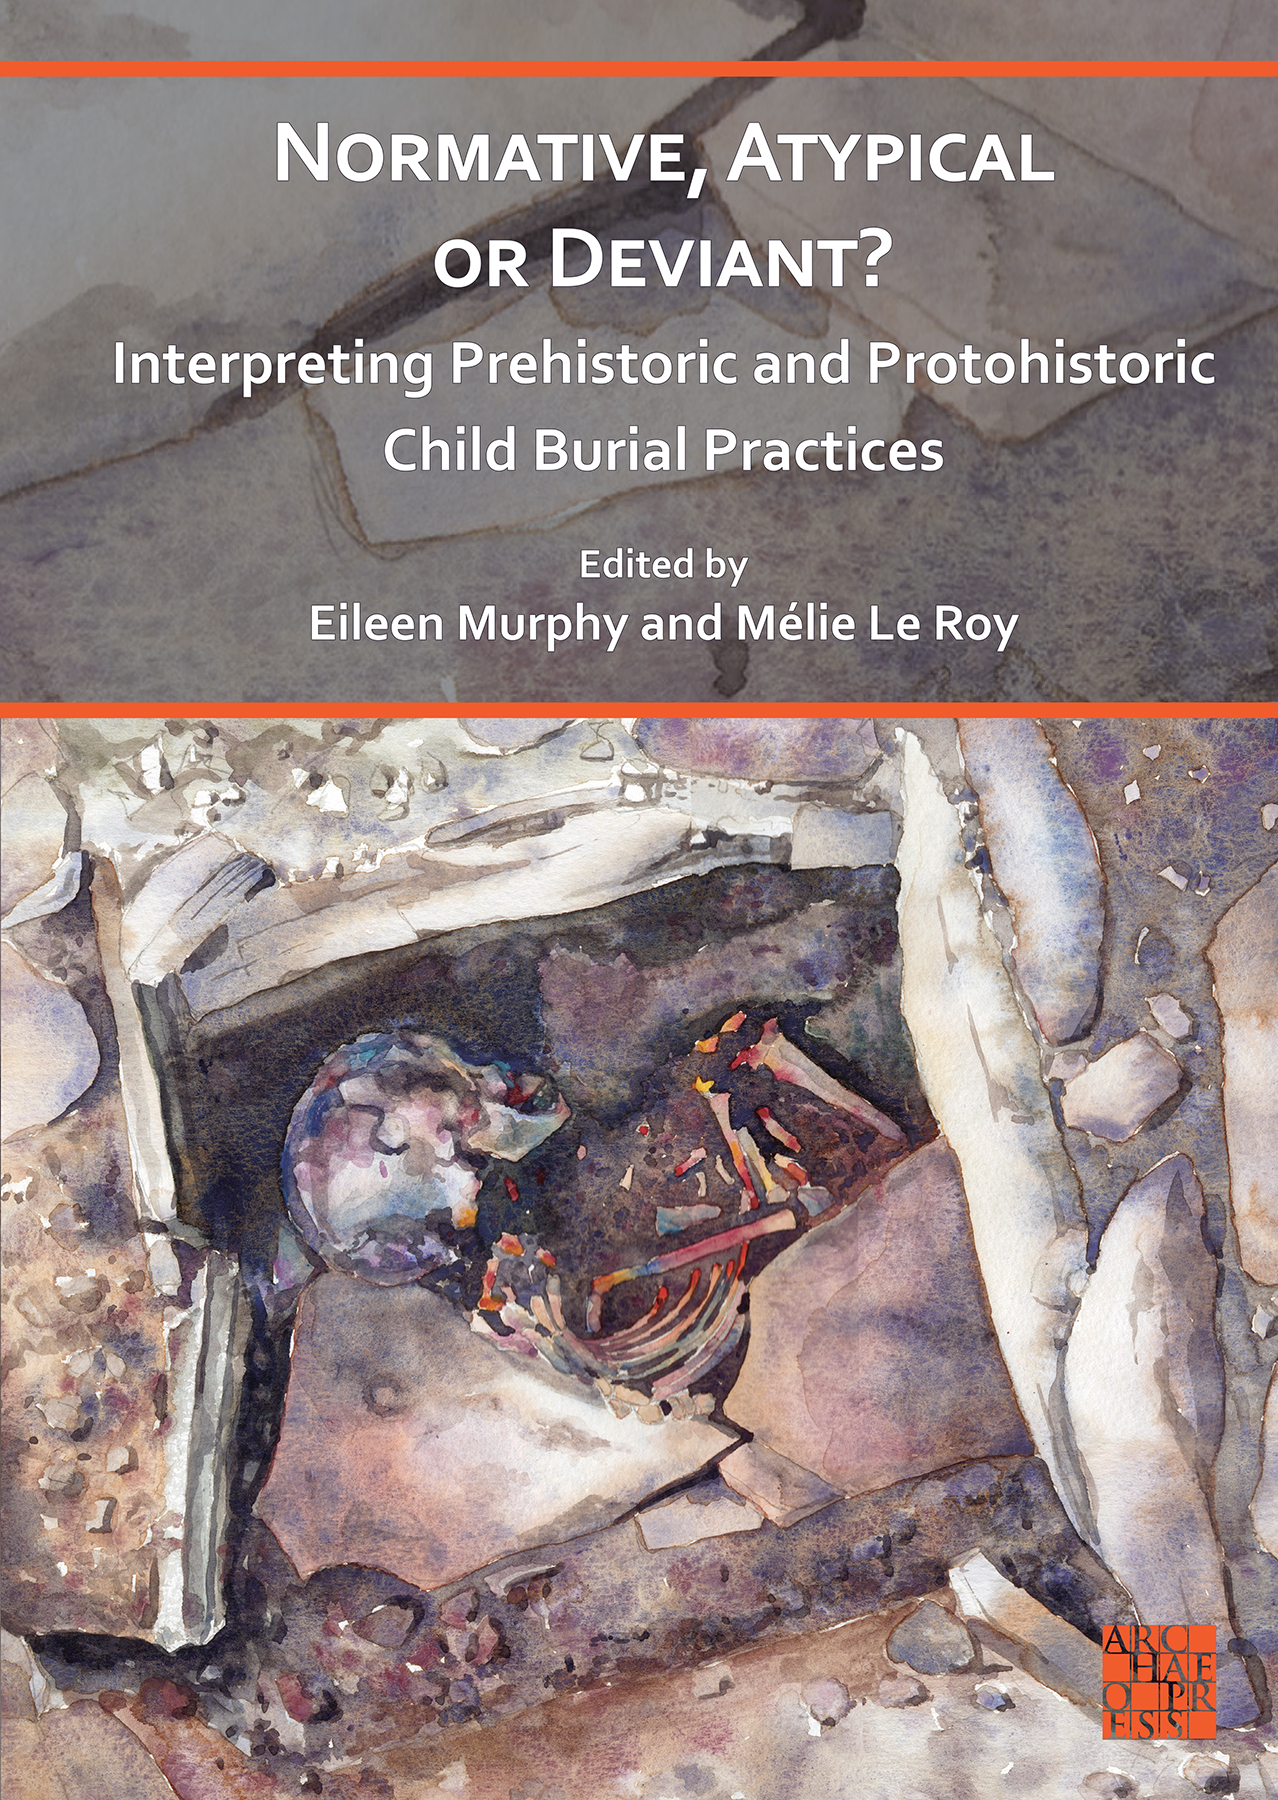 Normative, Atypical or Deviant ? Interpreting Prehistoric and Protohistoric Child Burial Practices, 2023, 268 p.